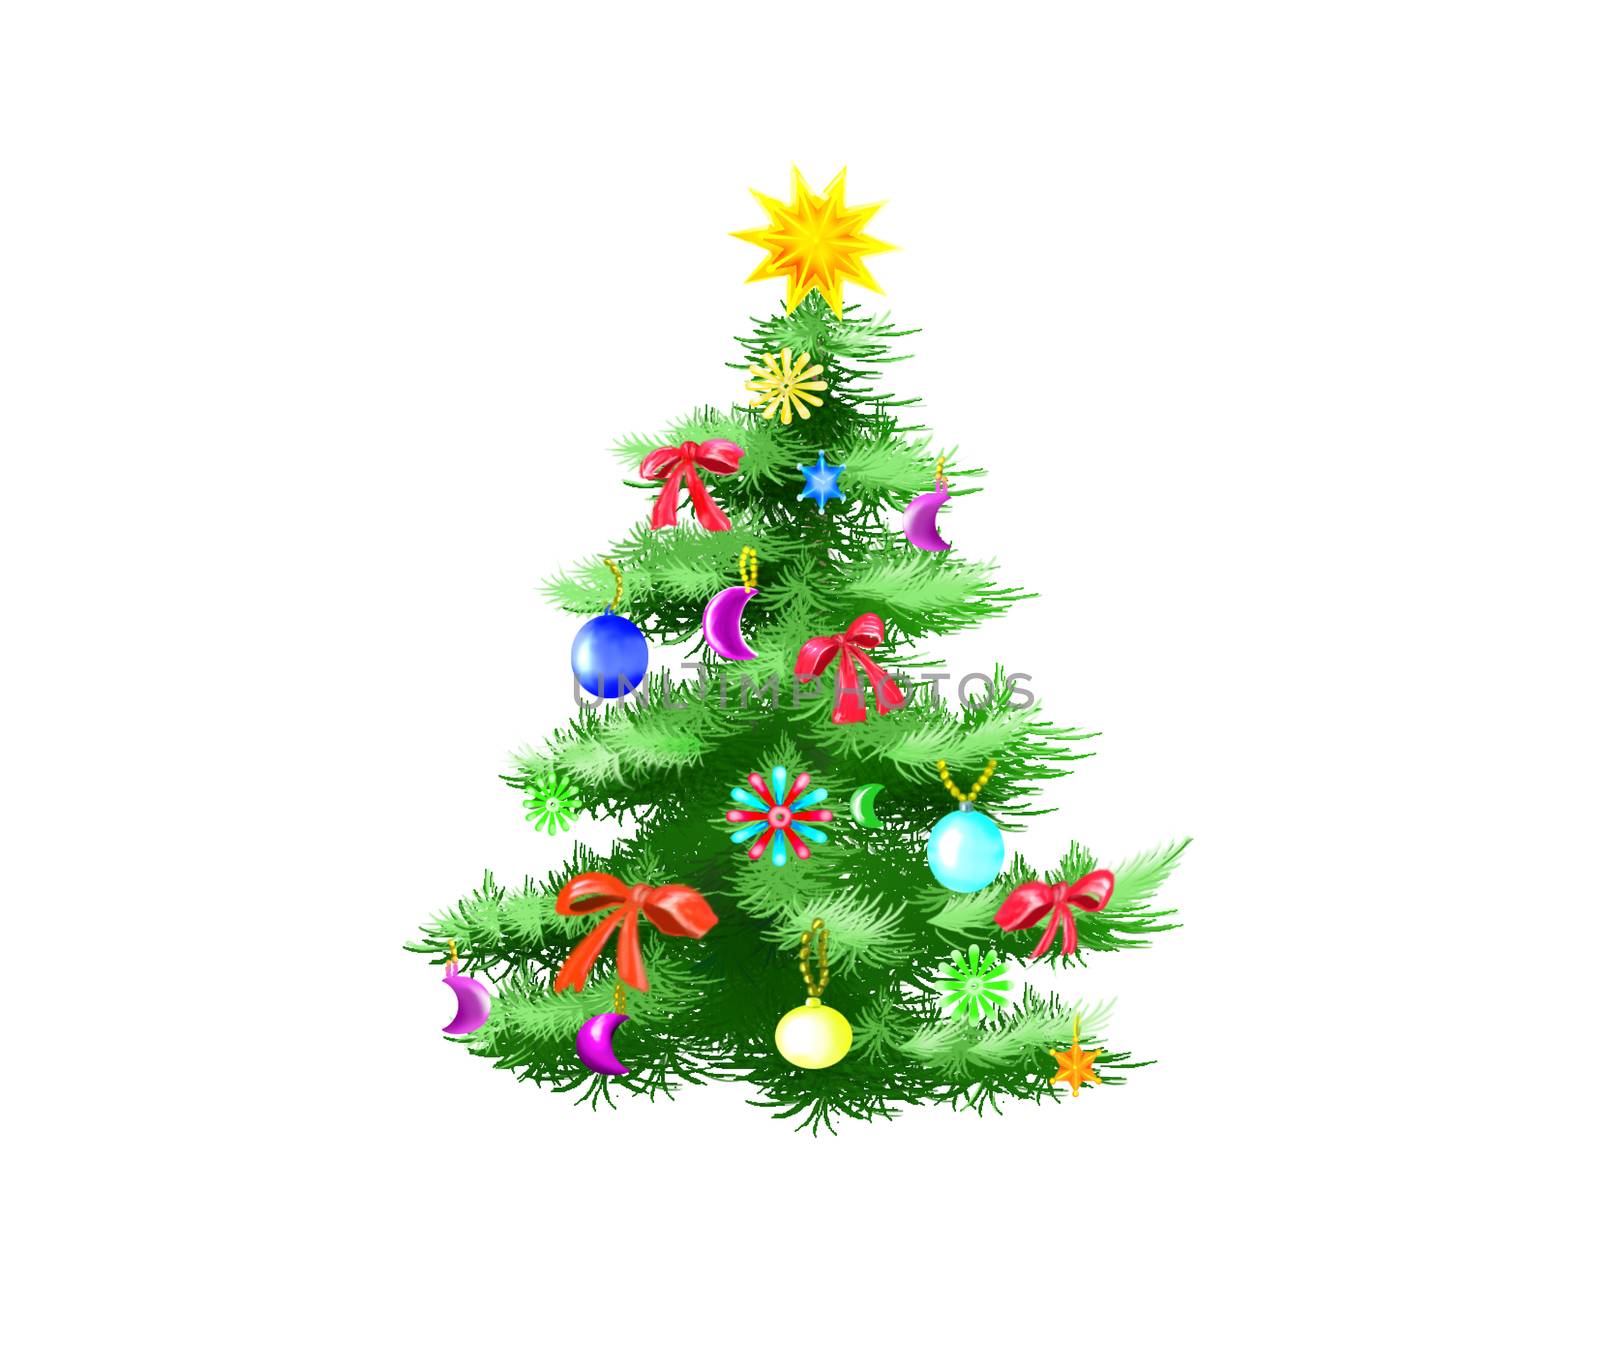 Festively Decorated Christmas Tree Isolated on White Background by Multipedia